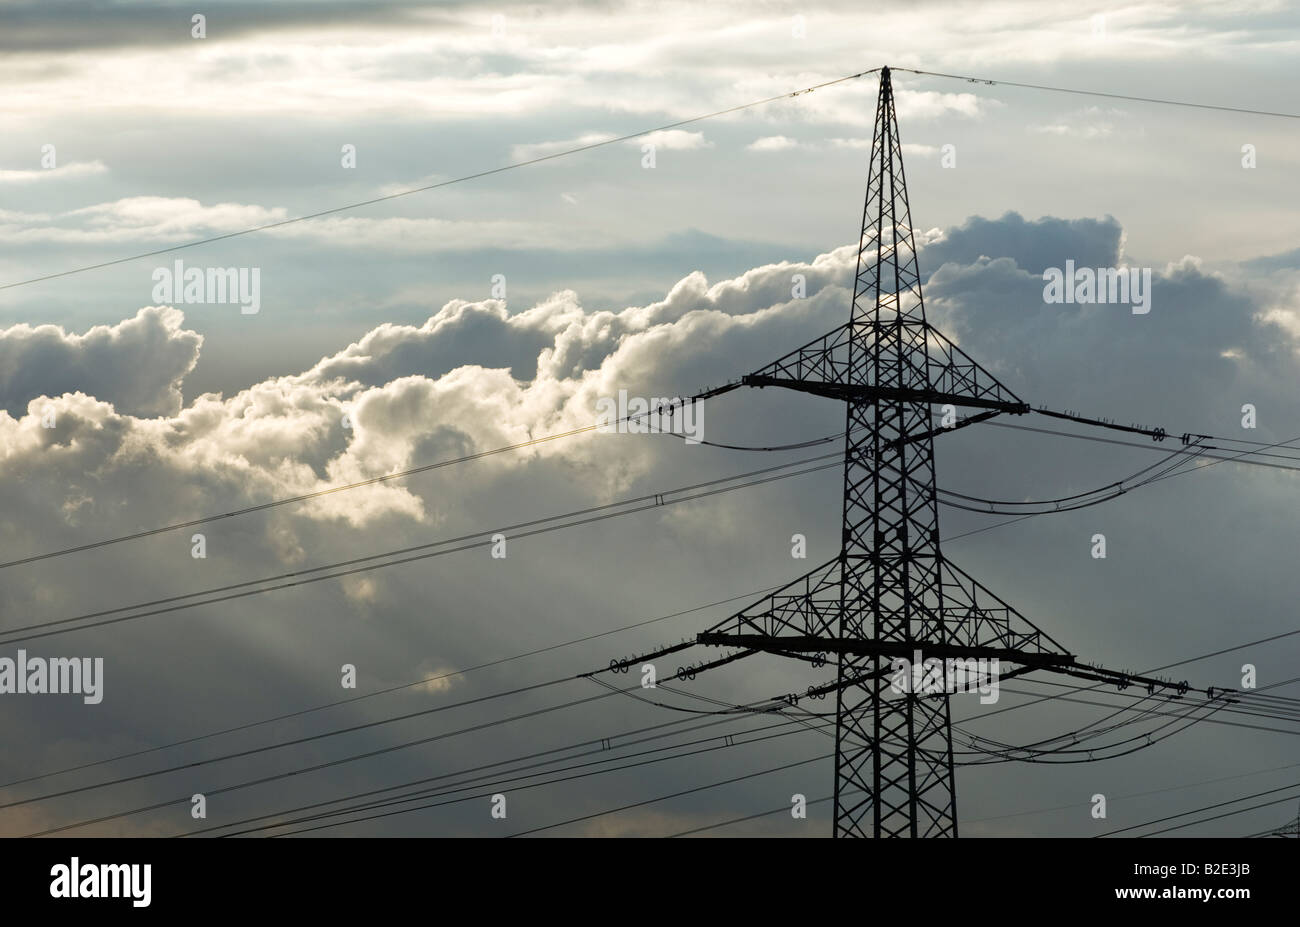 High tension electricity power cables and pylon against sunlit clouds sky Stock Photo